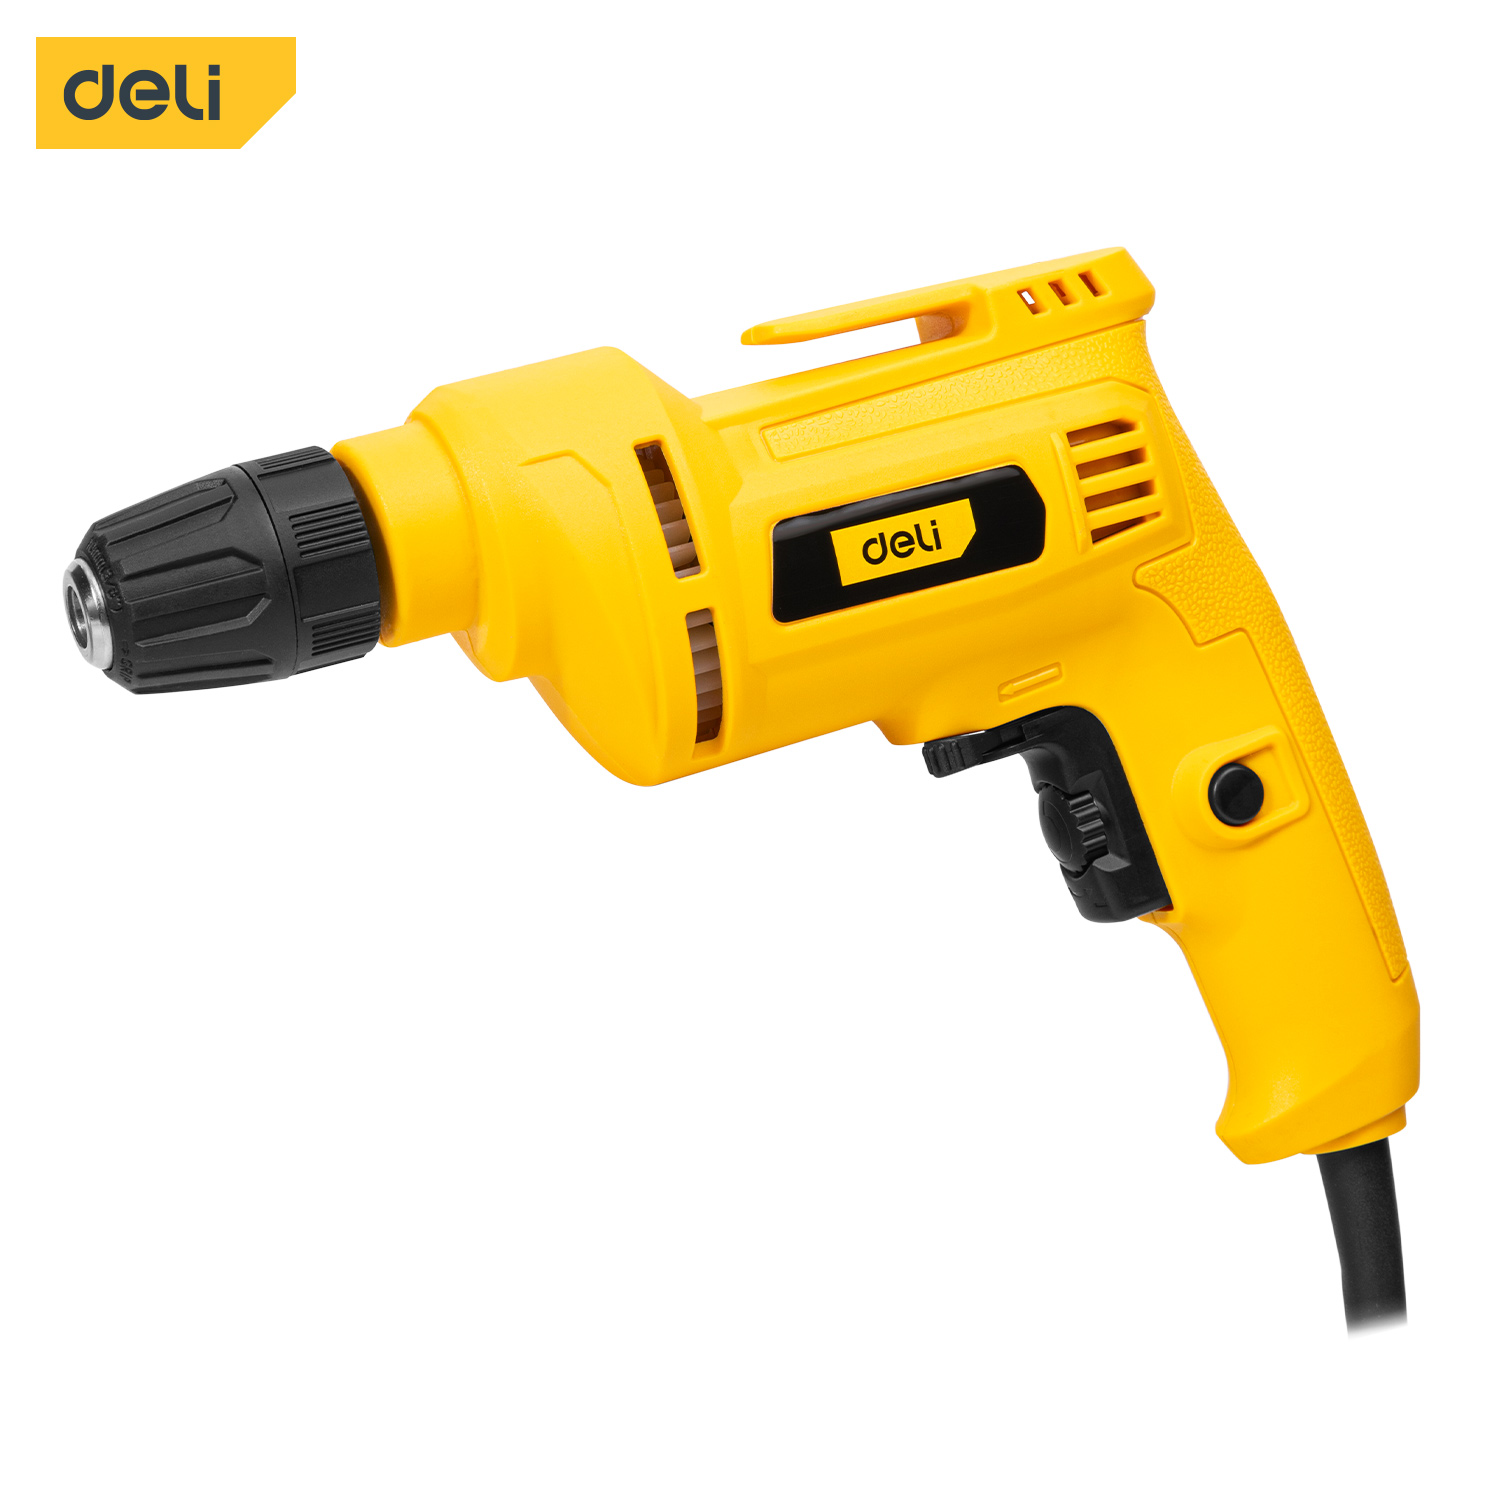 Heavy duty Corded electric drill for screws